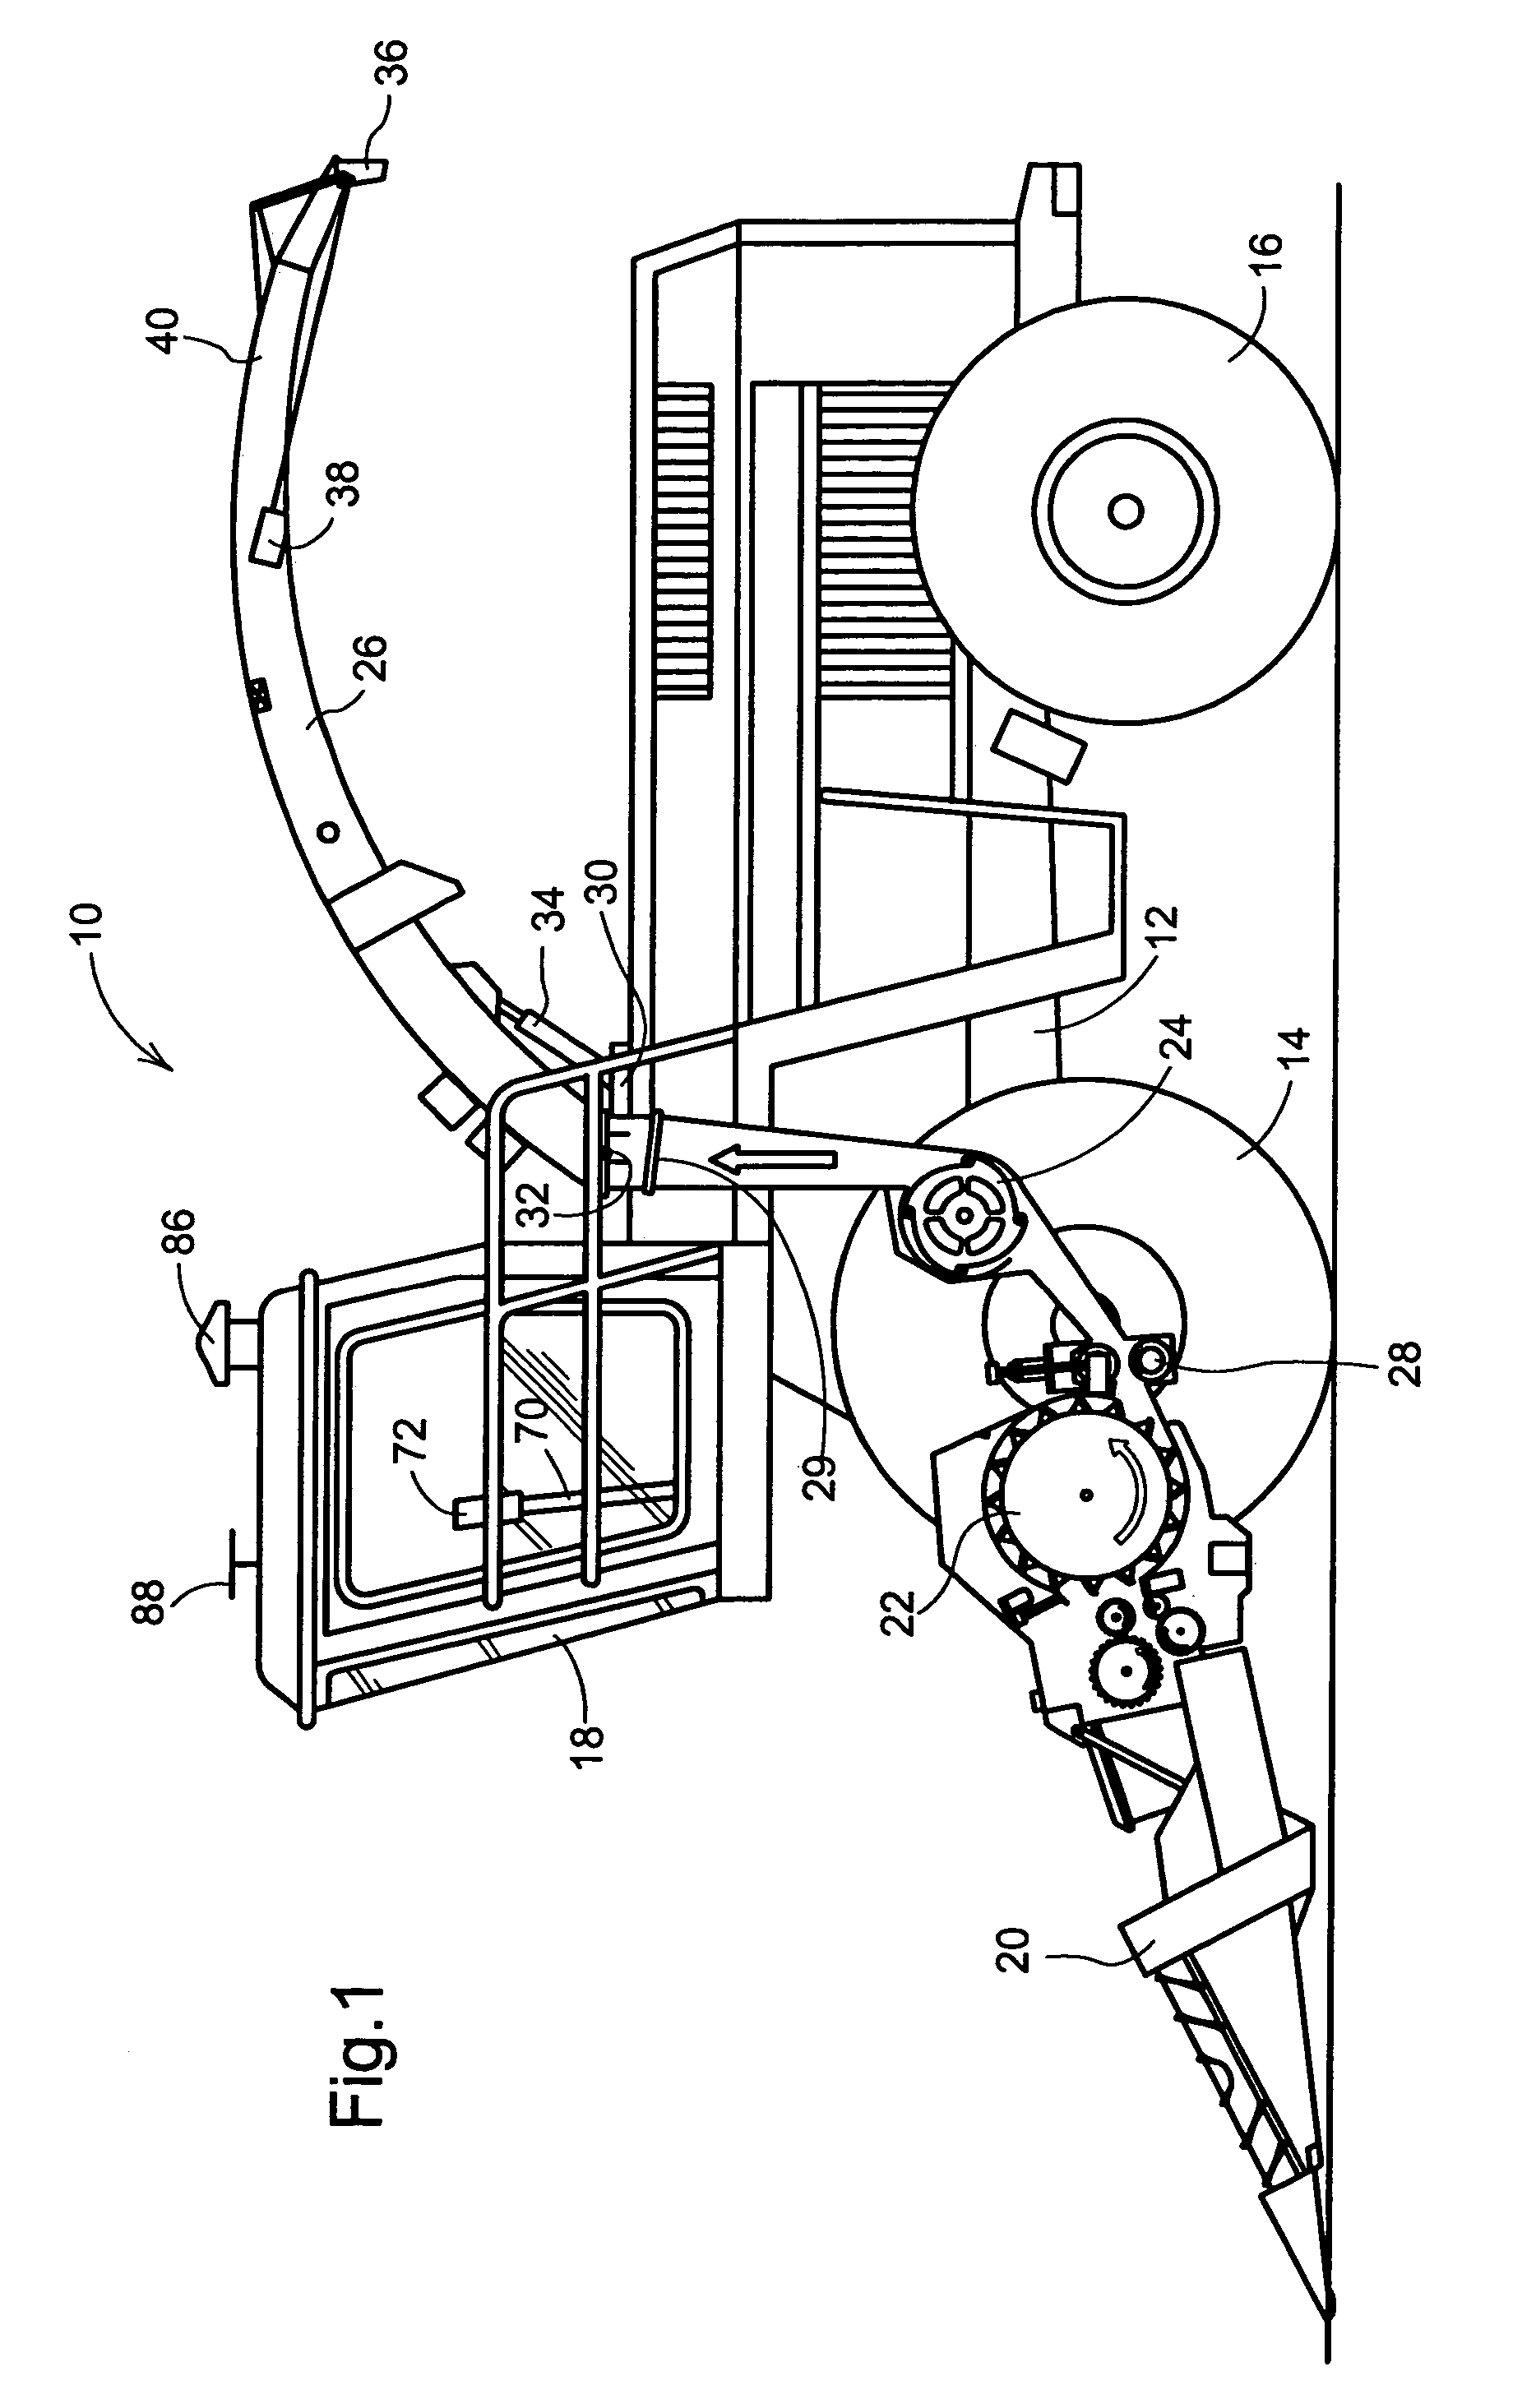 Control arrangement for crop discharging device of an agricultural harvesting machine